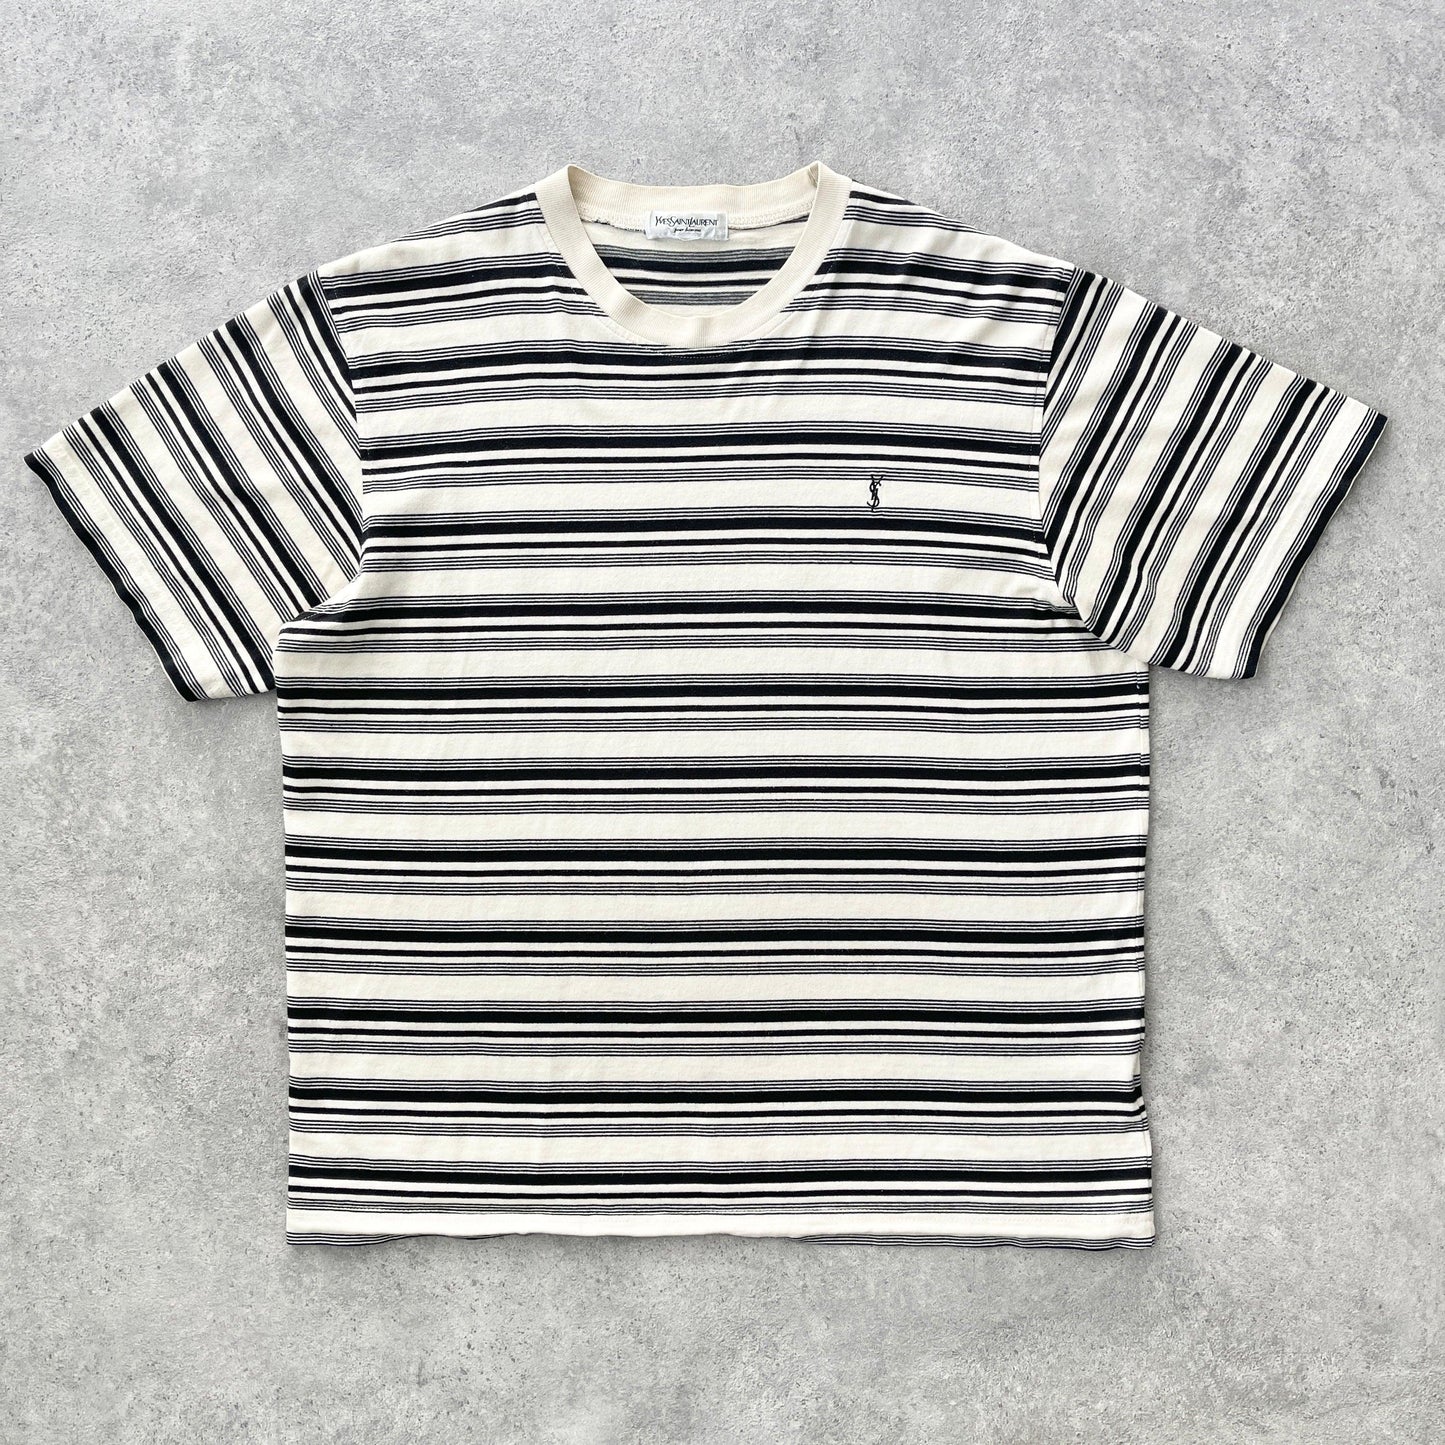 YSL 2000s heavyweight embroidered logo striped t-shirt (L) - Known Source